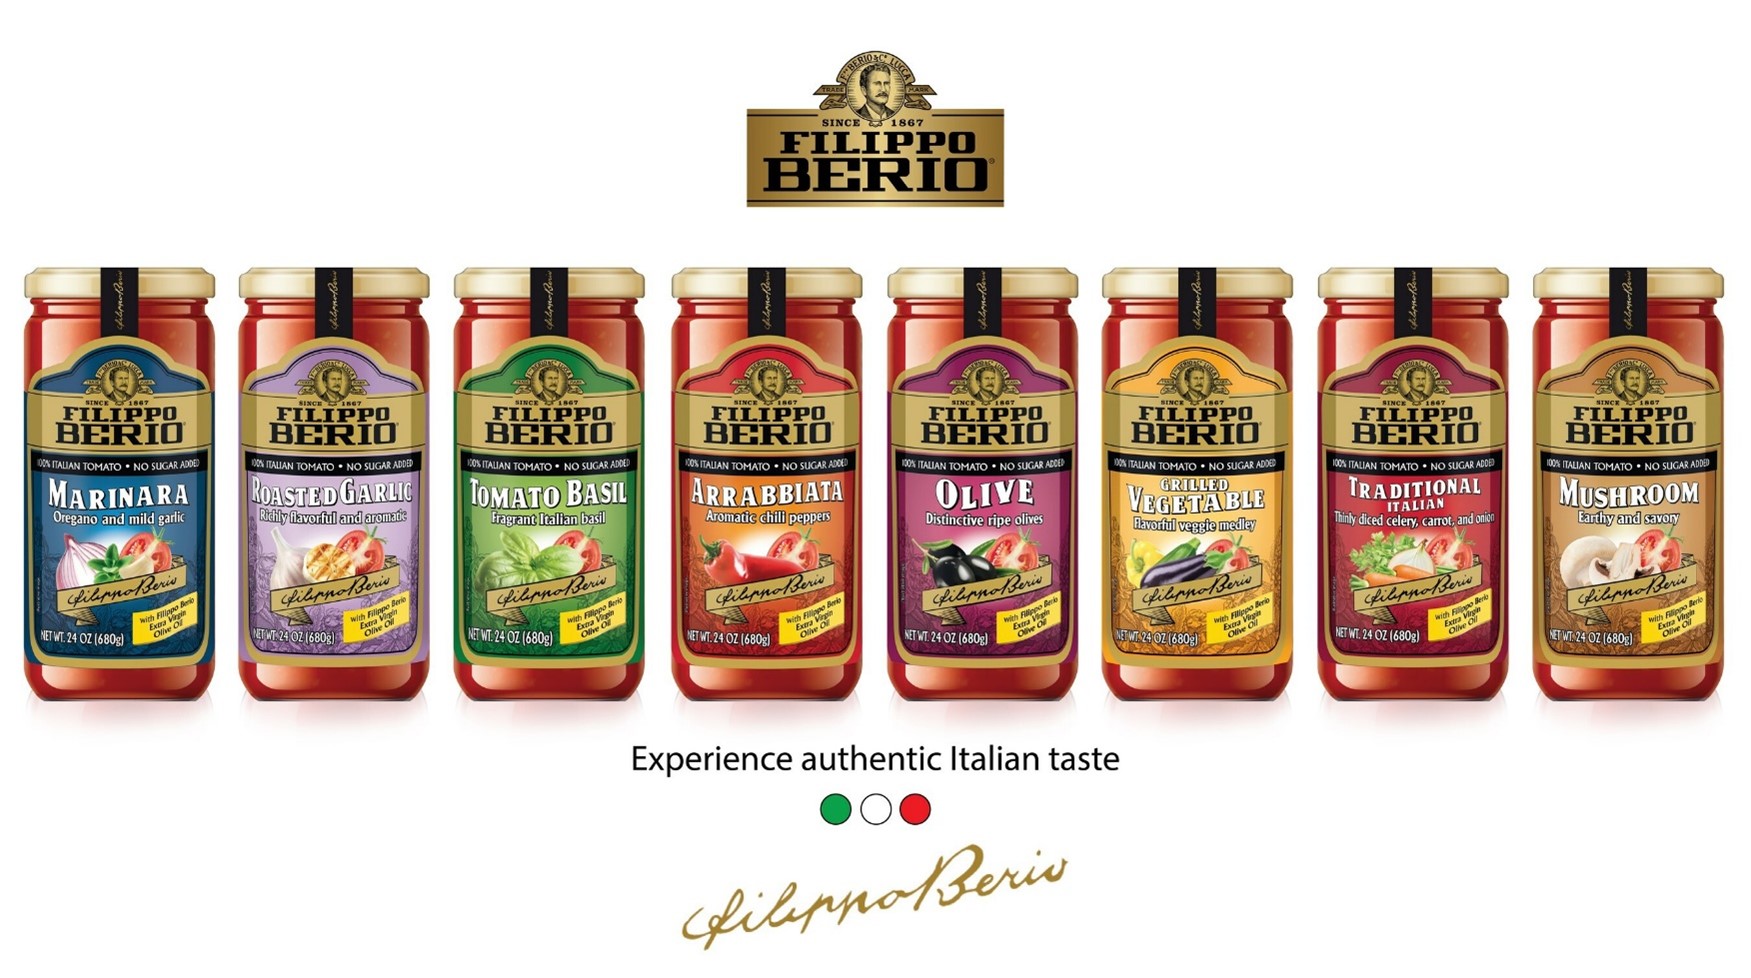 Filippo Berio enters new category; introduces array of tomato-based sauces delivering rich, fresh, authentic Italian flavors to U.S. consumers